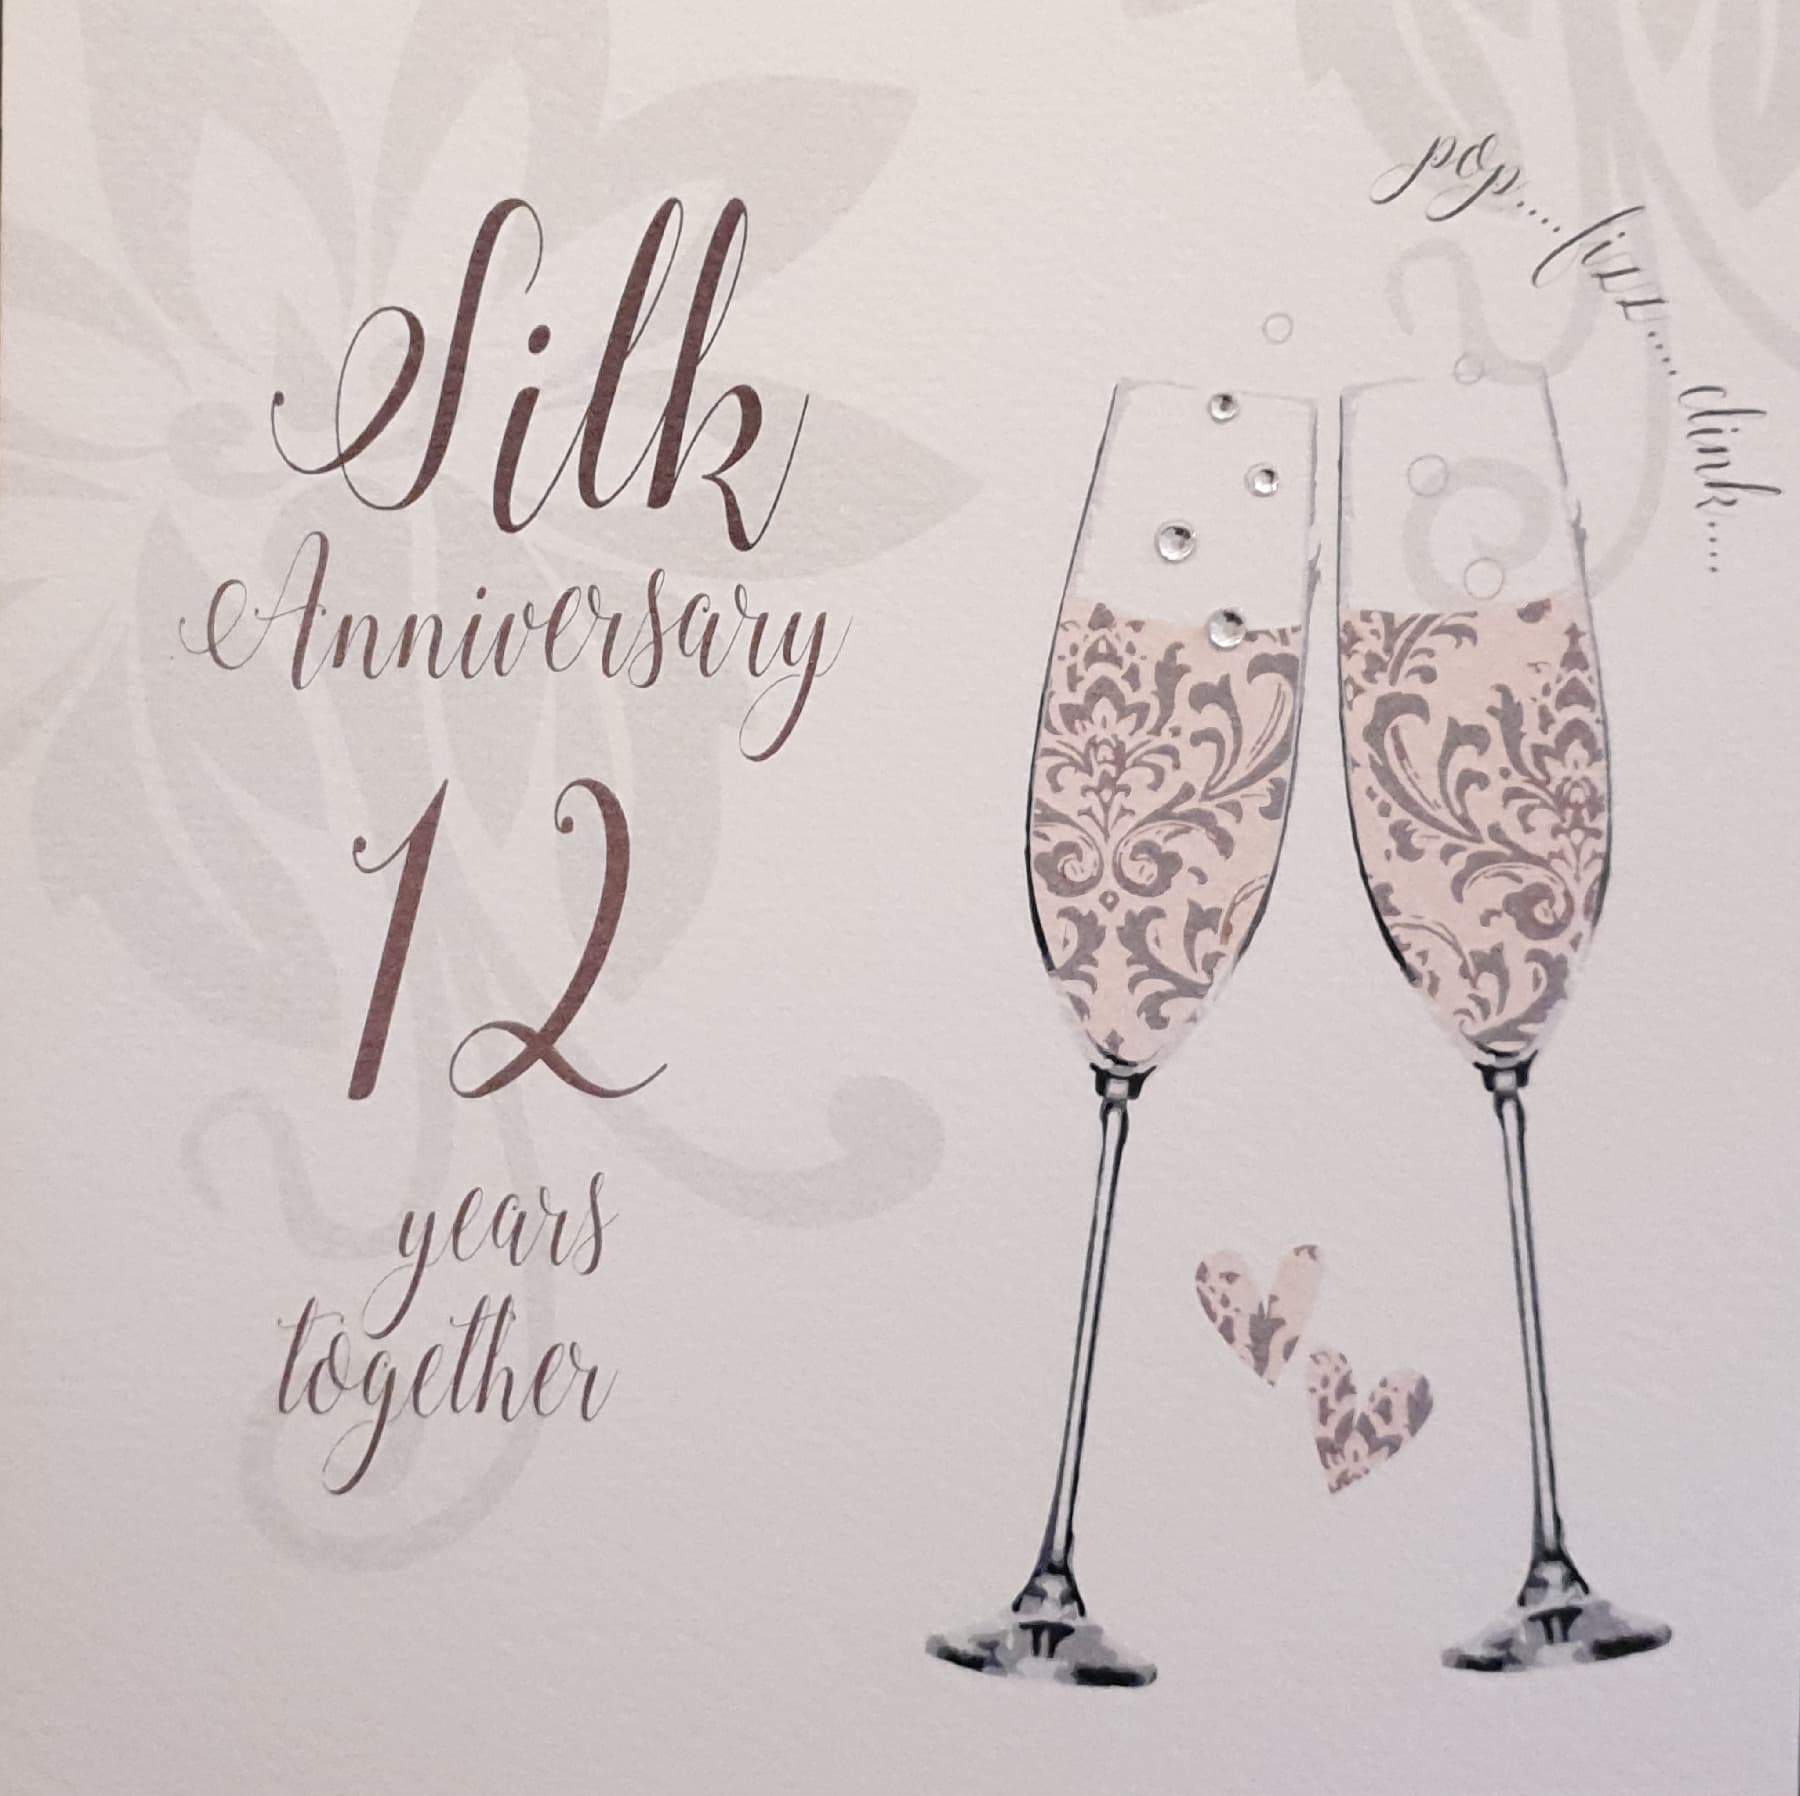 Anniversary Card - Silk Anniversary - 12 Years Together / Two Pink Champagne Glasses